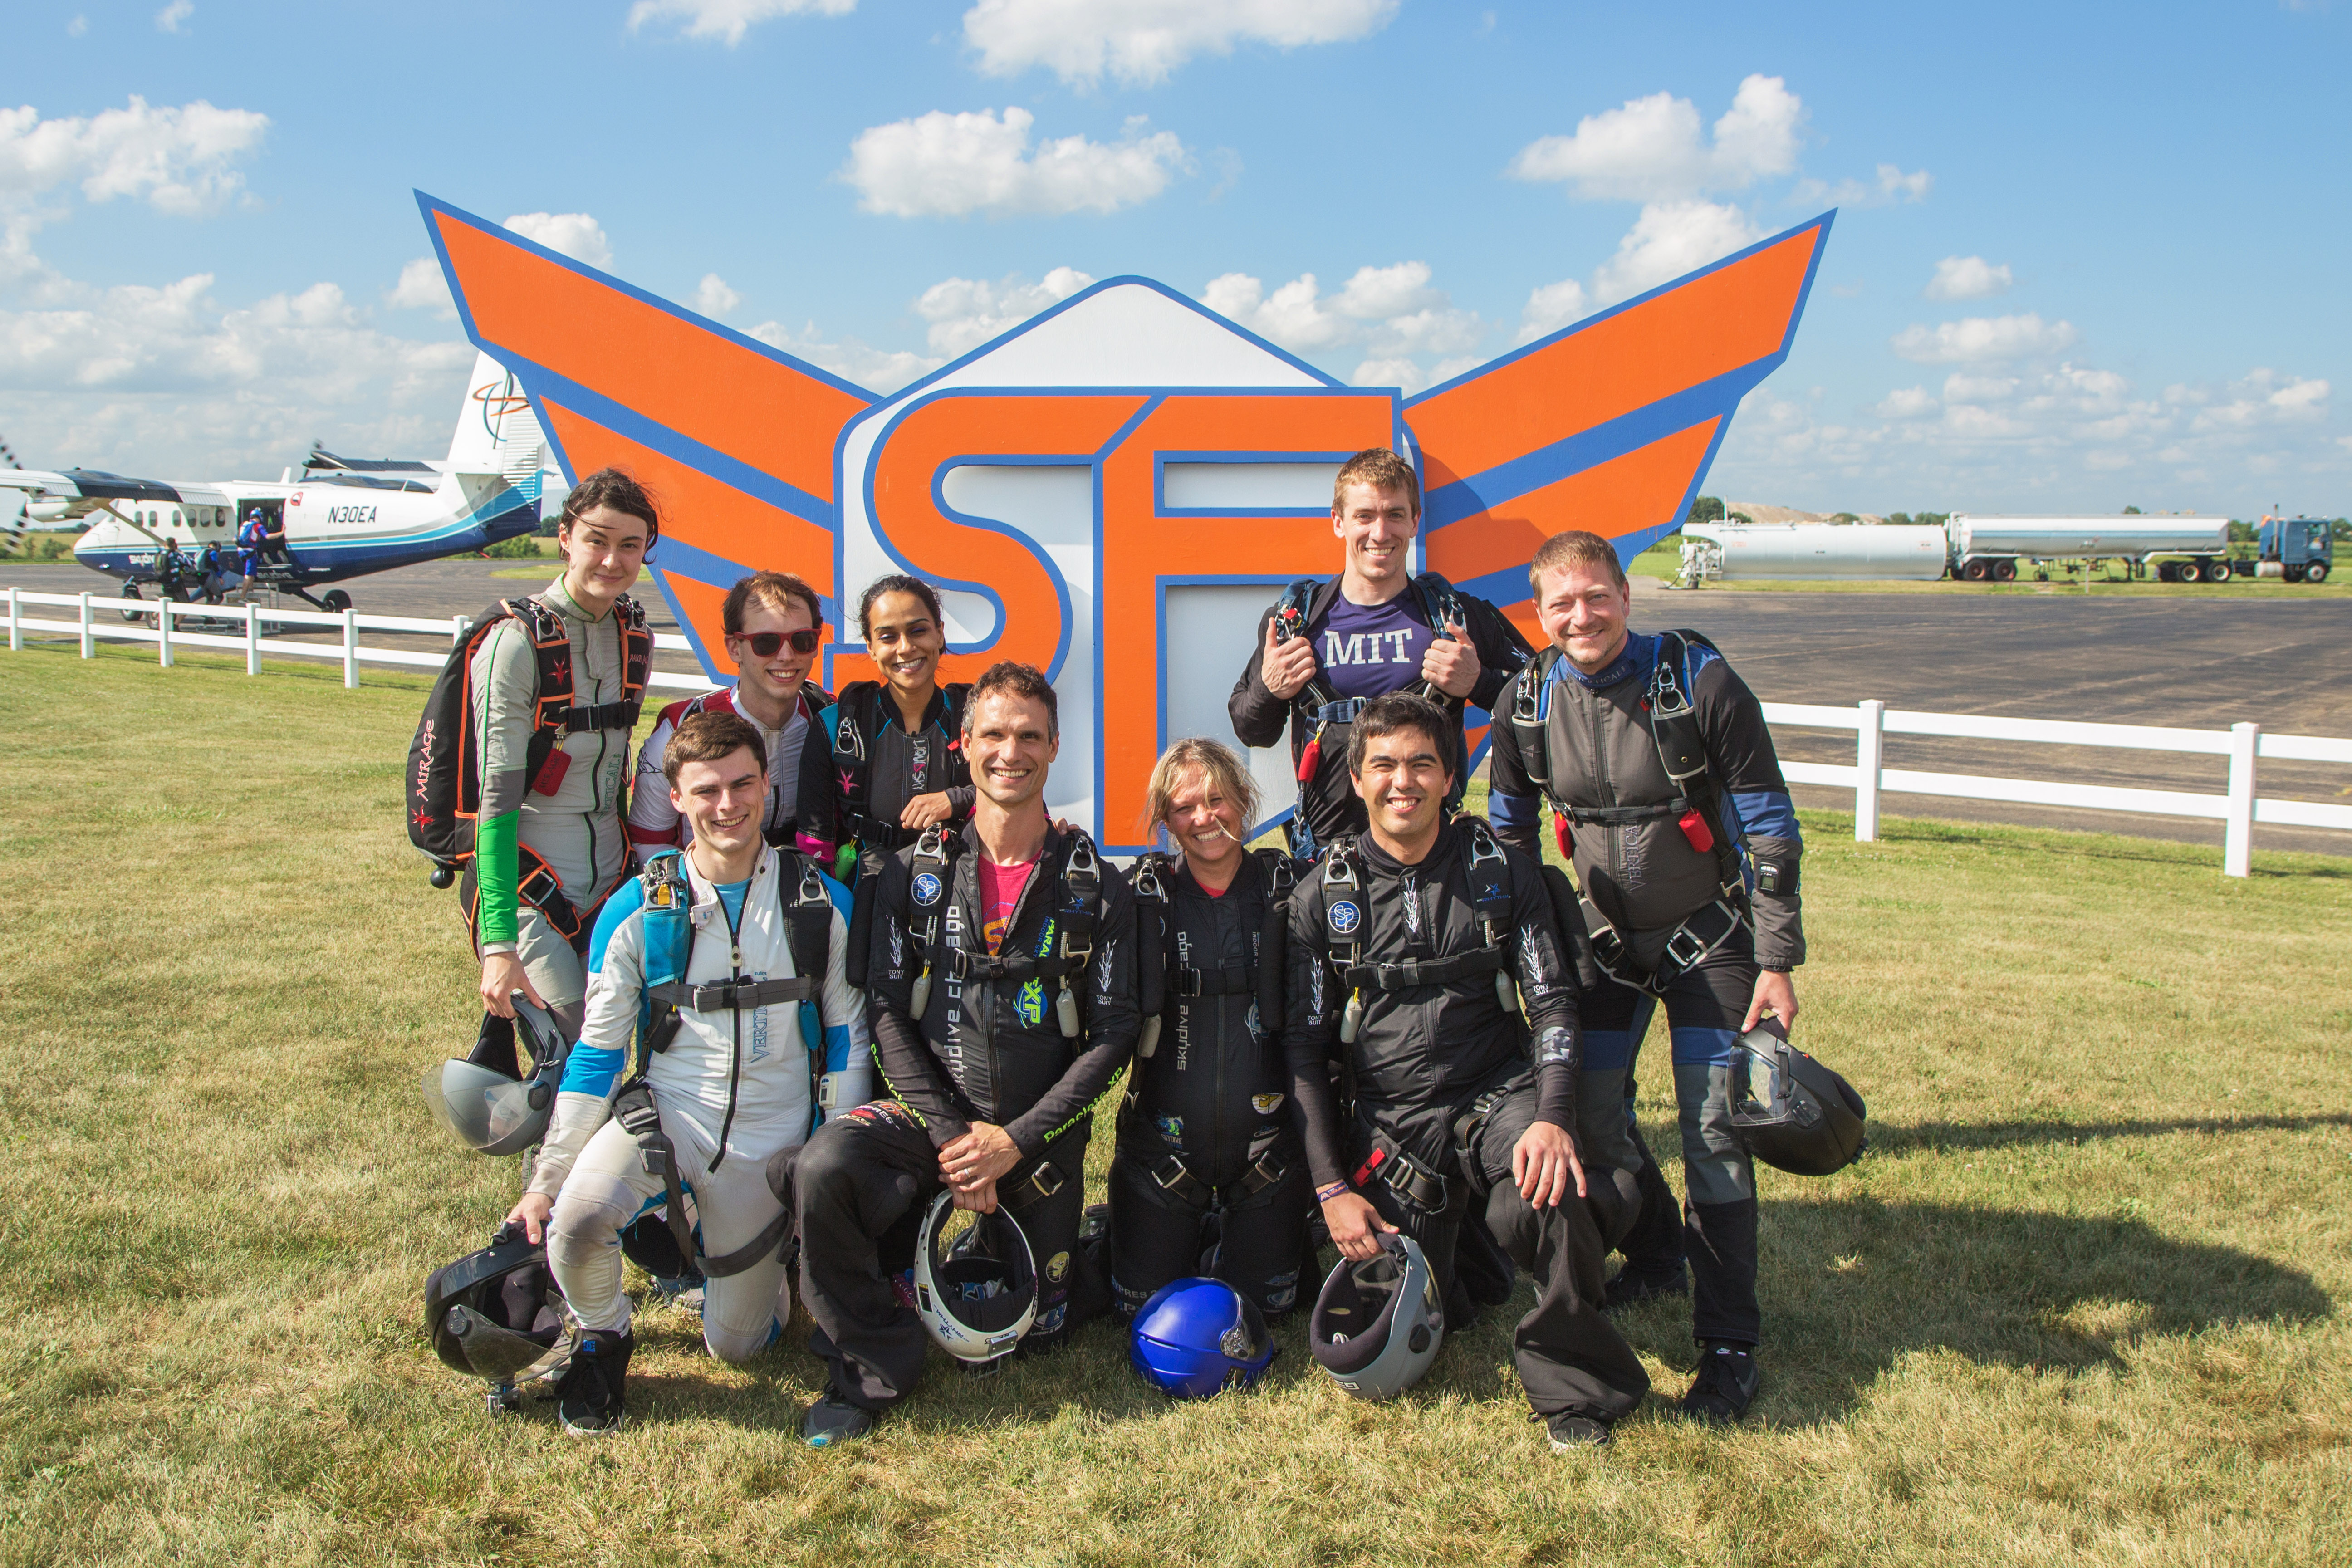 Nine MIT alumni jumped from a plane and formed a T for Tech 